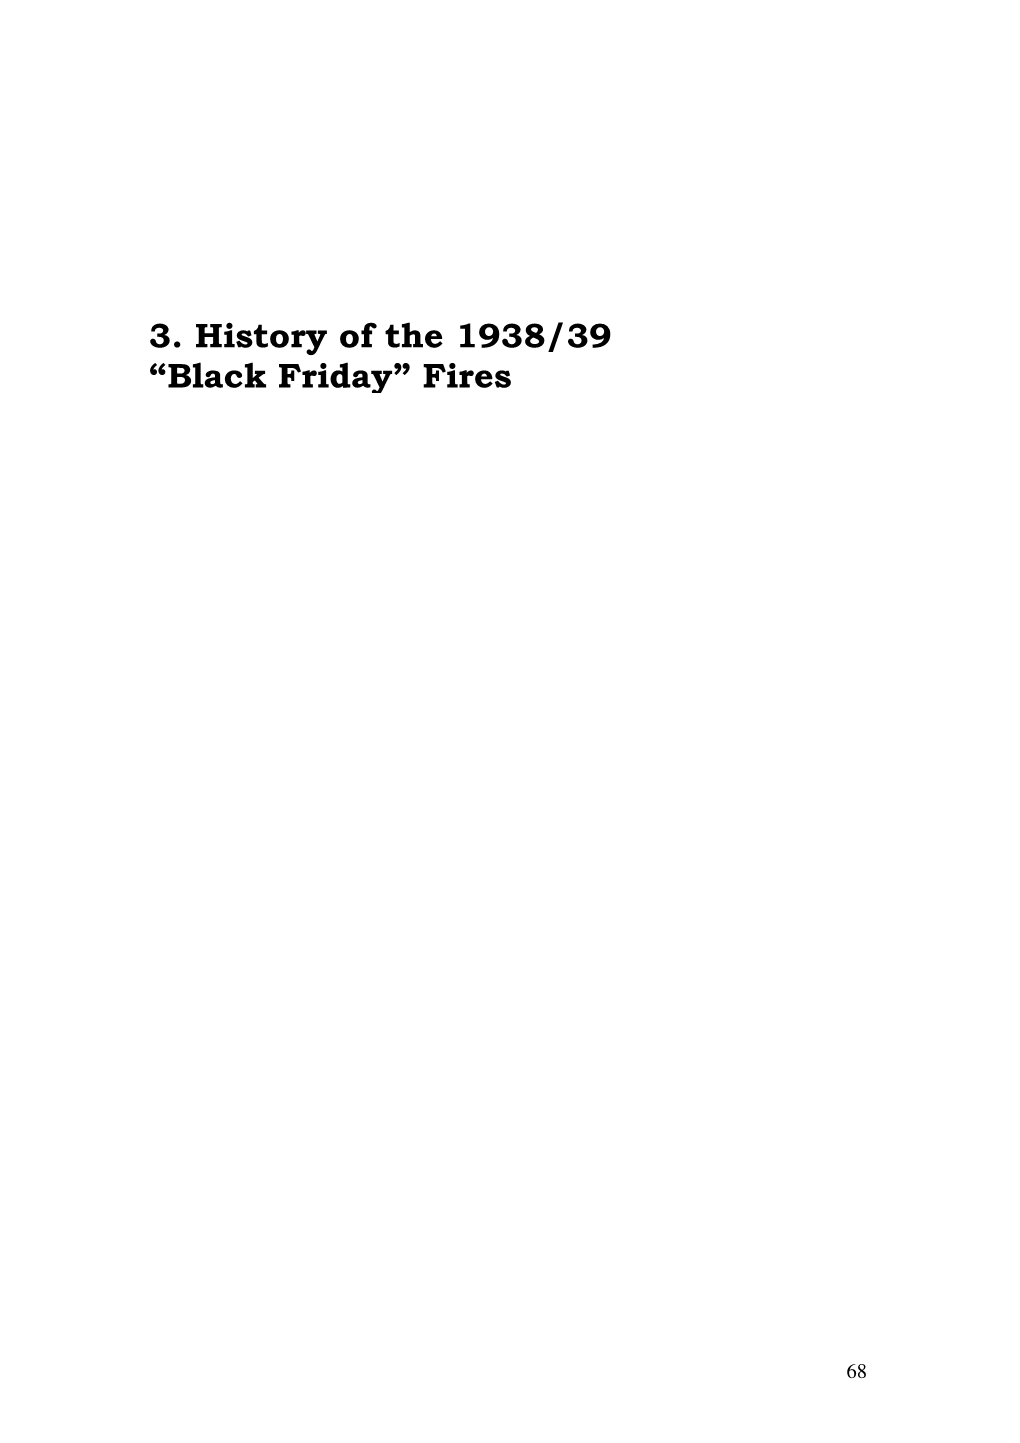 3. History of the 1938/39 “Black Friday” Fires